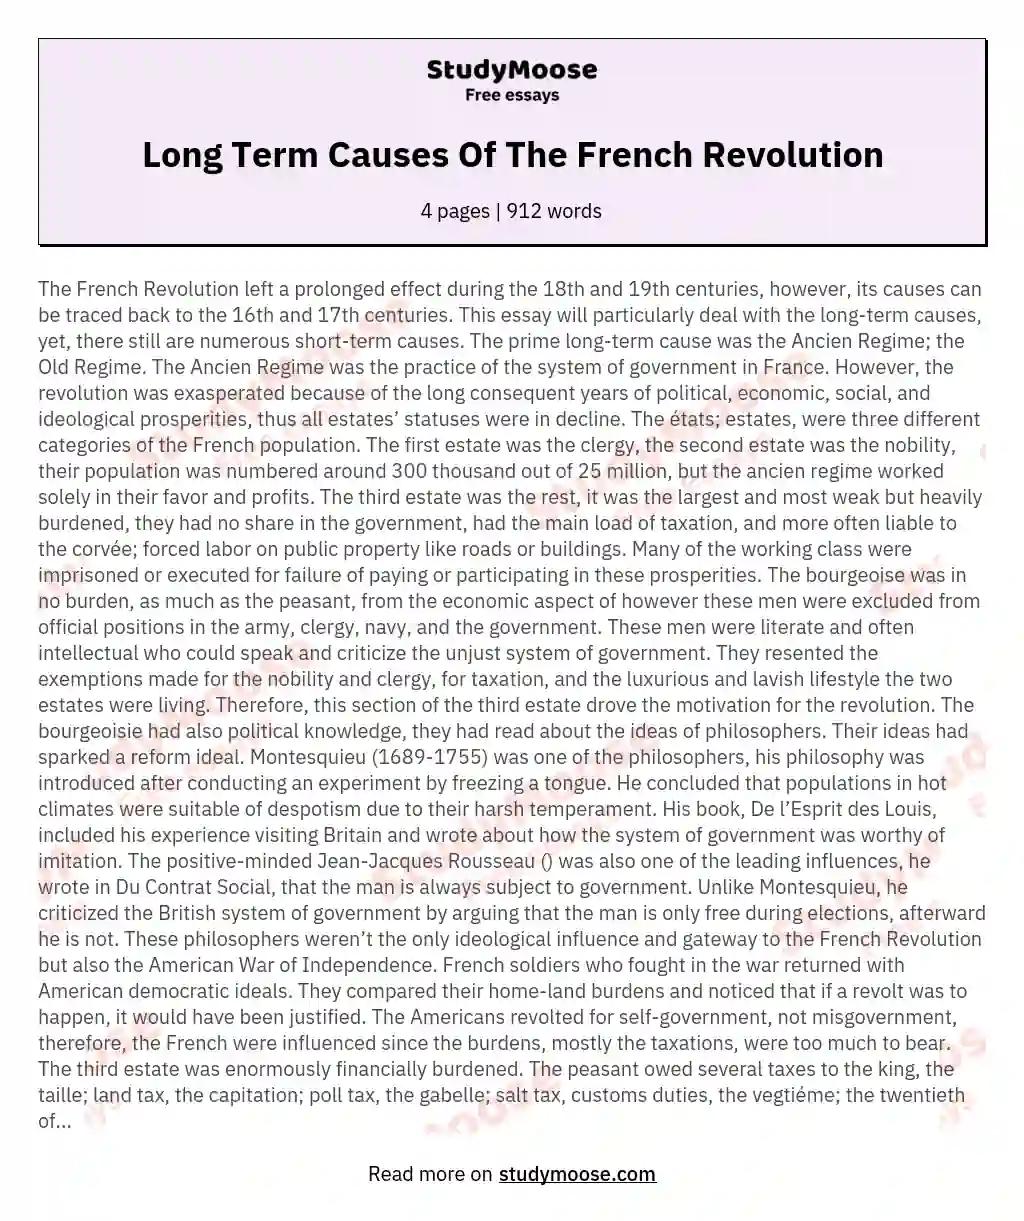 Long Term Causes Of The French Revolution essay